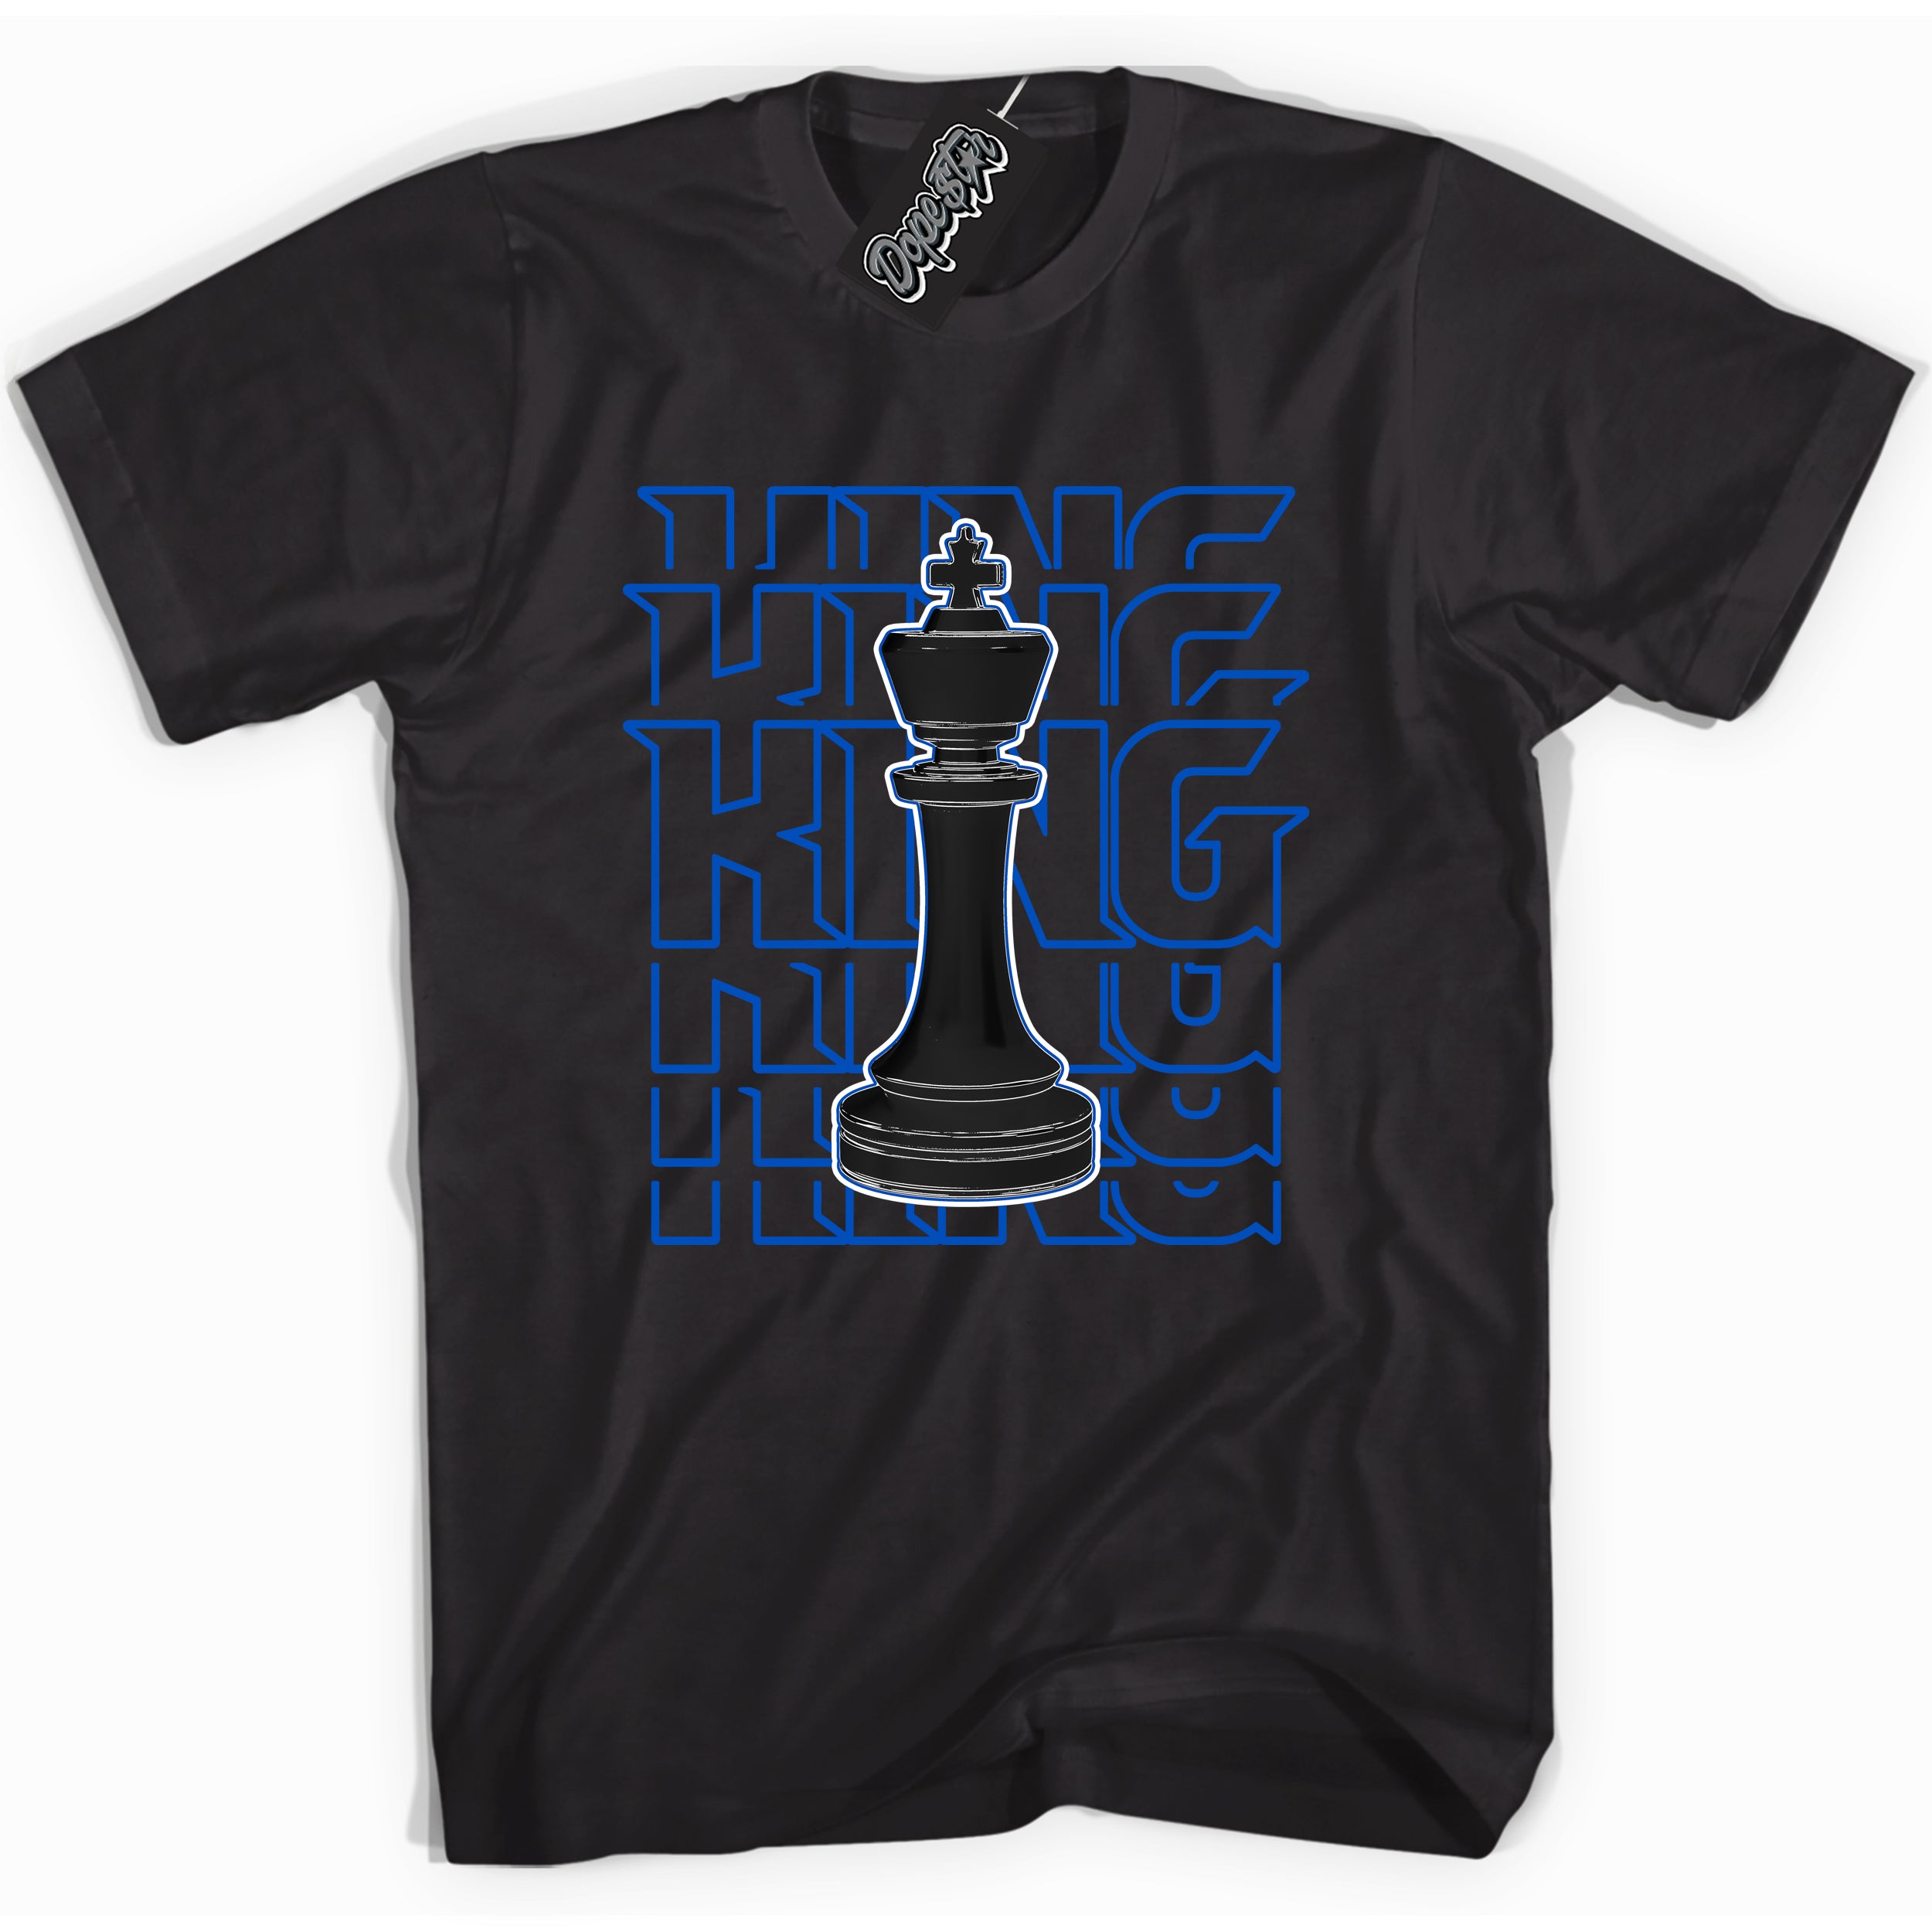 Cool Black graphic tee with "King Chess" design, that perfectly matches Royal Reimagined 1s sneakers 